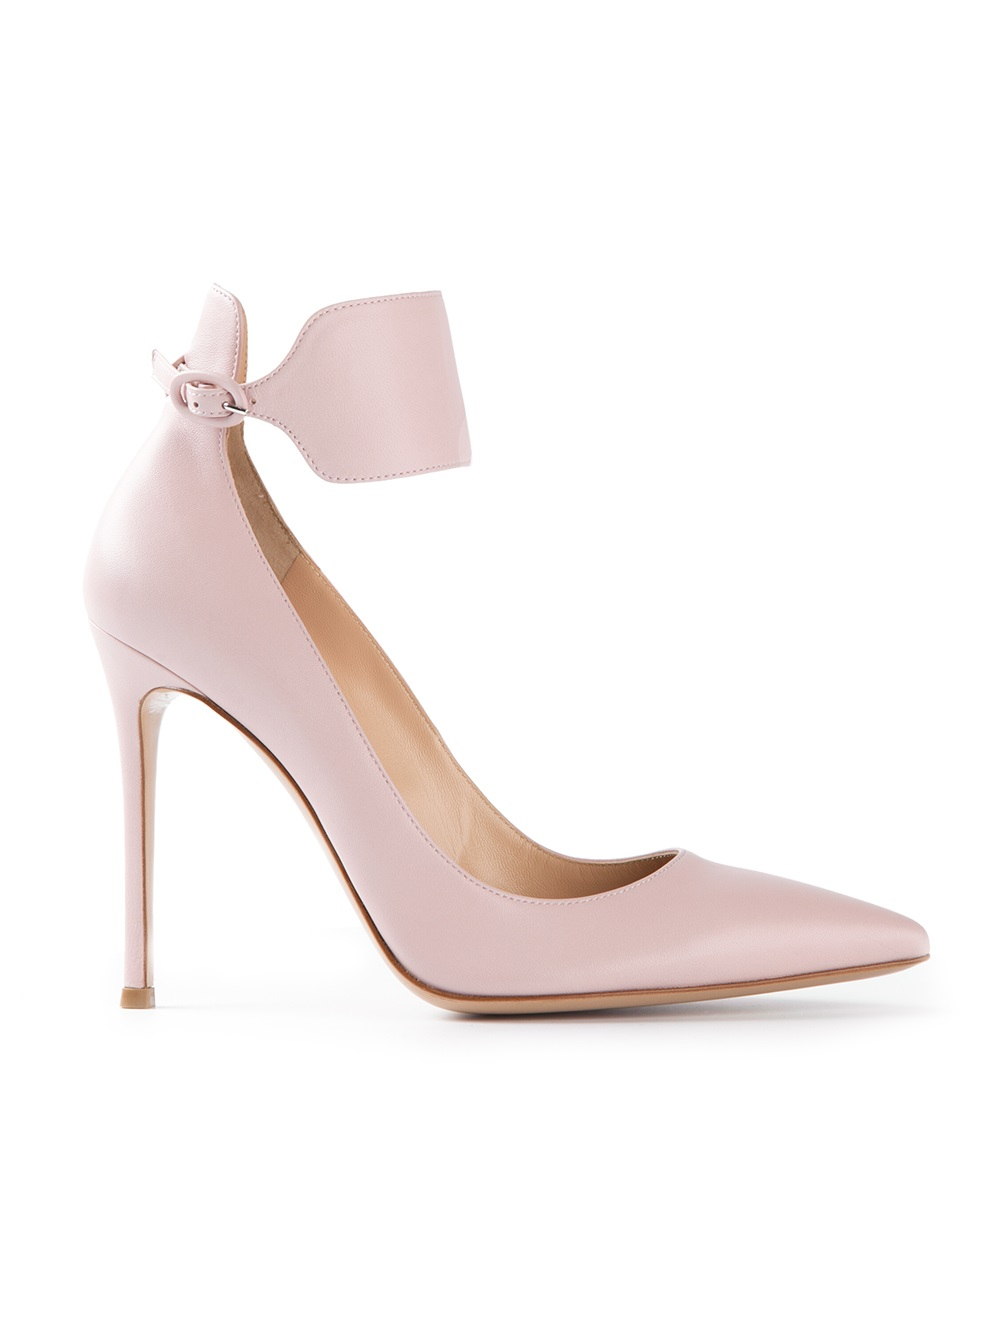 Lyst - Gianvito Rossi Ankle Strap Pumps in Pink